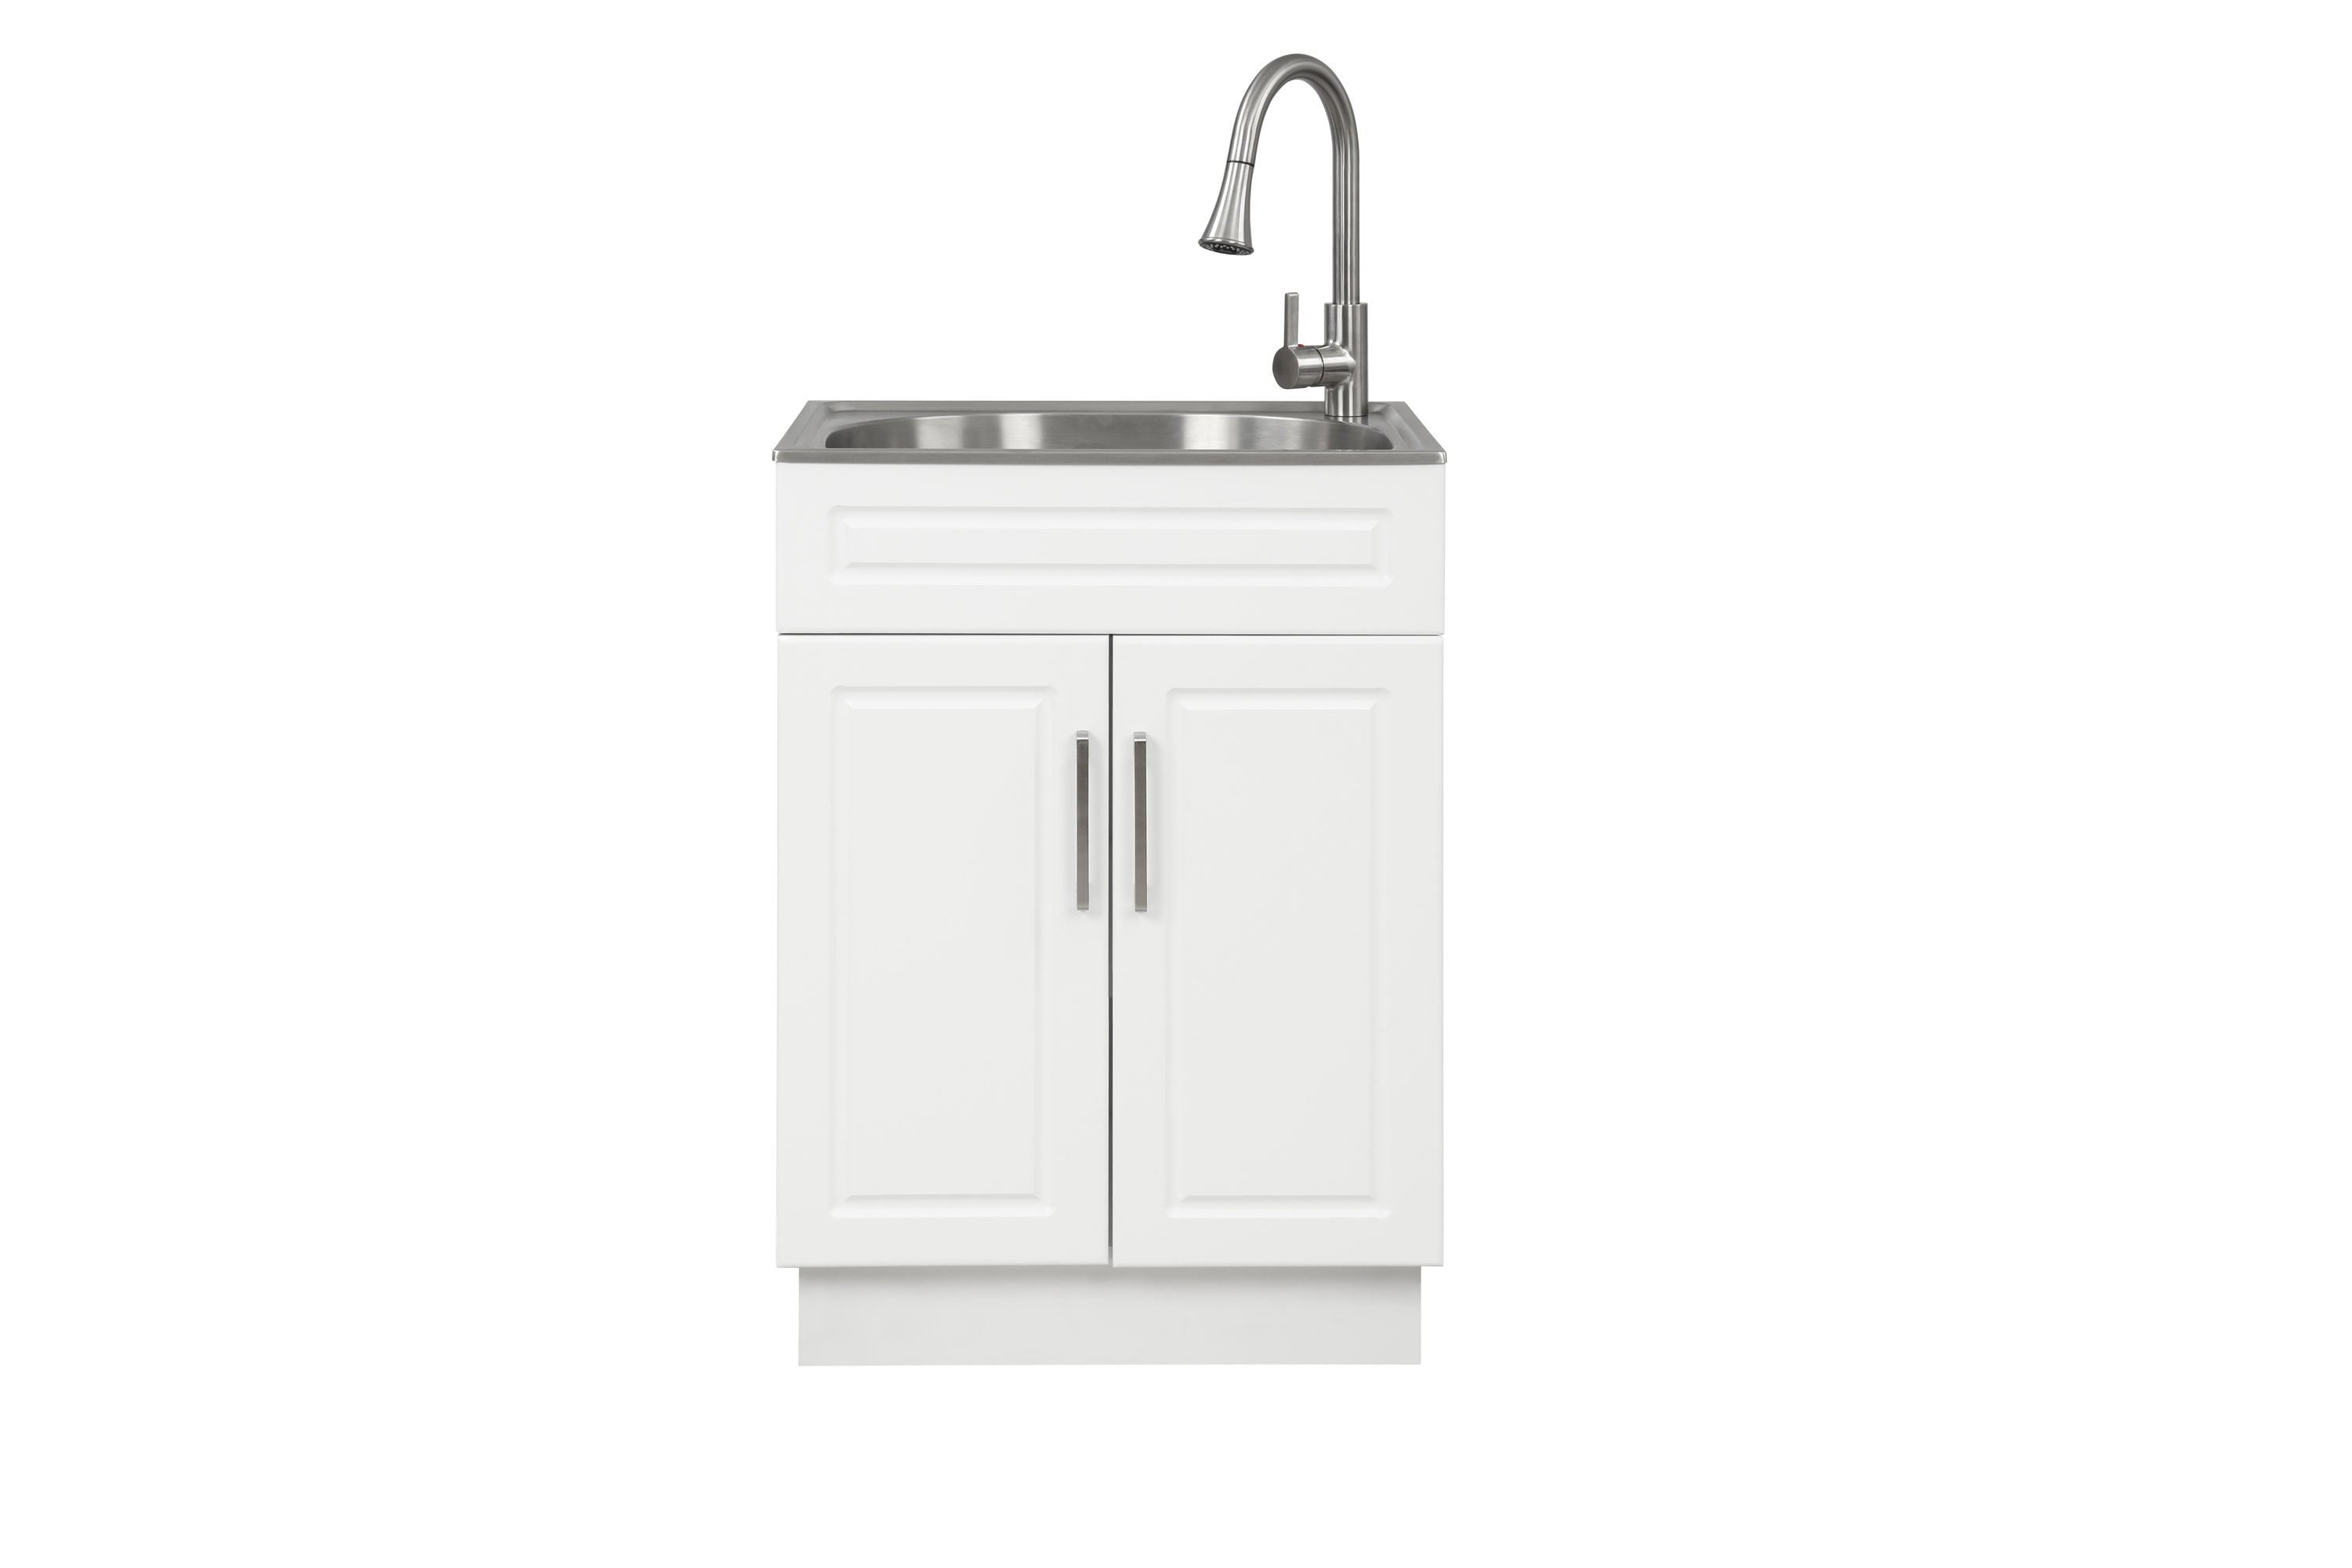 Spacious White Utility Sink Laundry Tub Freestanding Sink Wash Station W/  Faucet